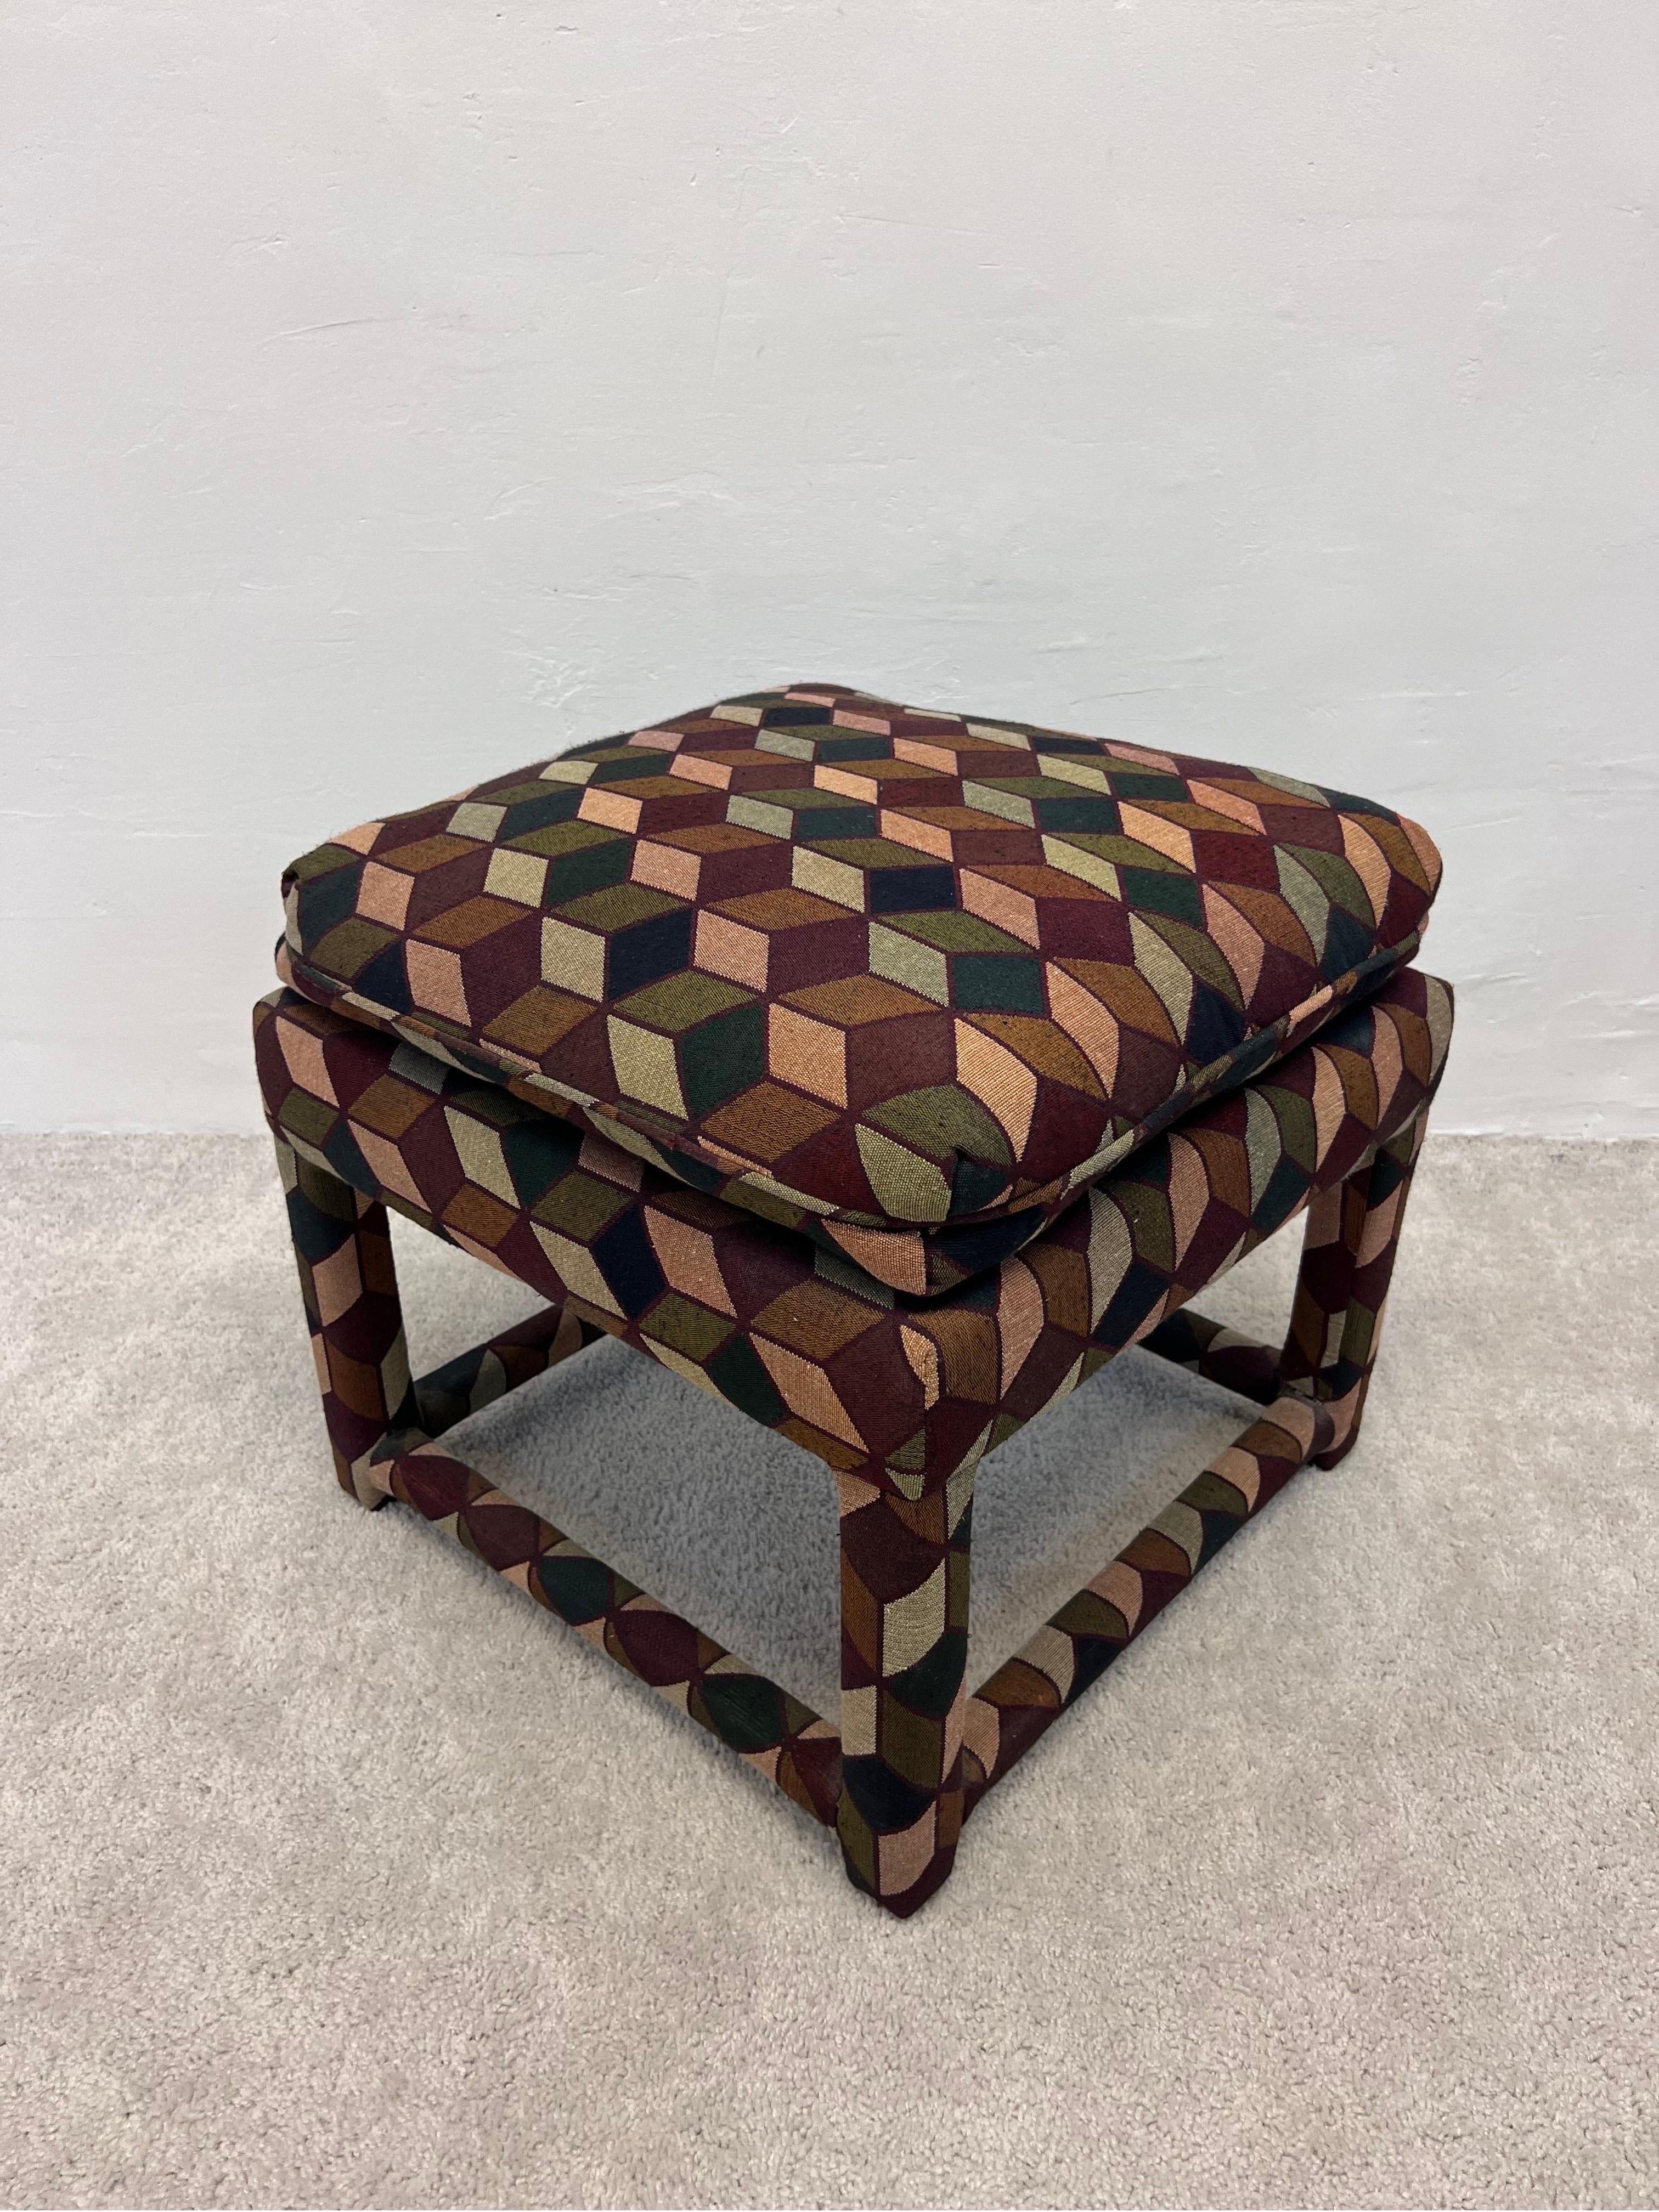 20th Century Mid-Century Stools with Tumbling Block Pattern Fabric and Down Cushions, a Pair